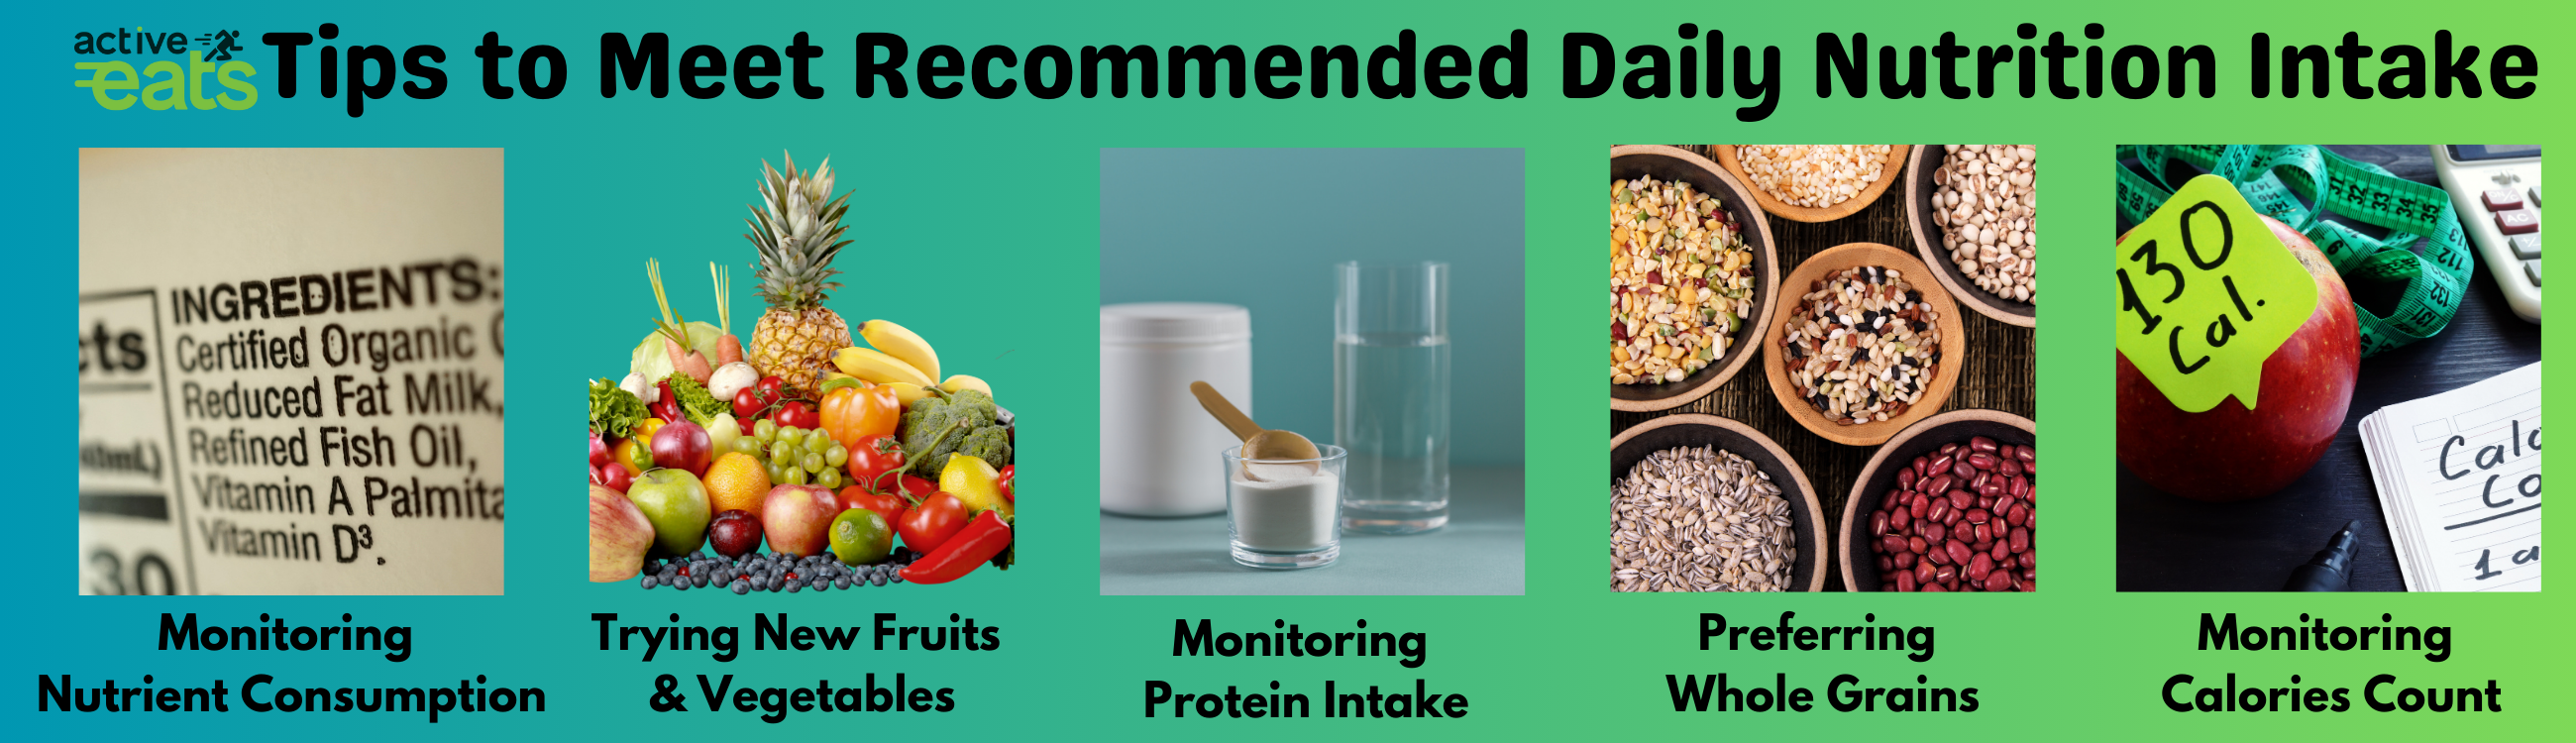 image showing tips recommended daily nutrition intake . monitoring nutrient consumption, trying new vegetable and fruits, monitoring protein intake, preferring whole grain and monitoring calories count.